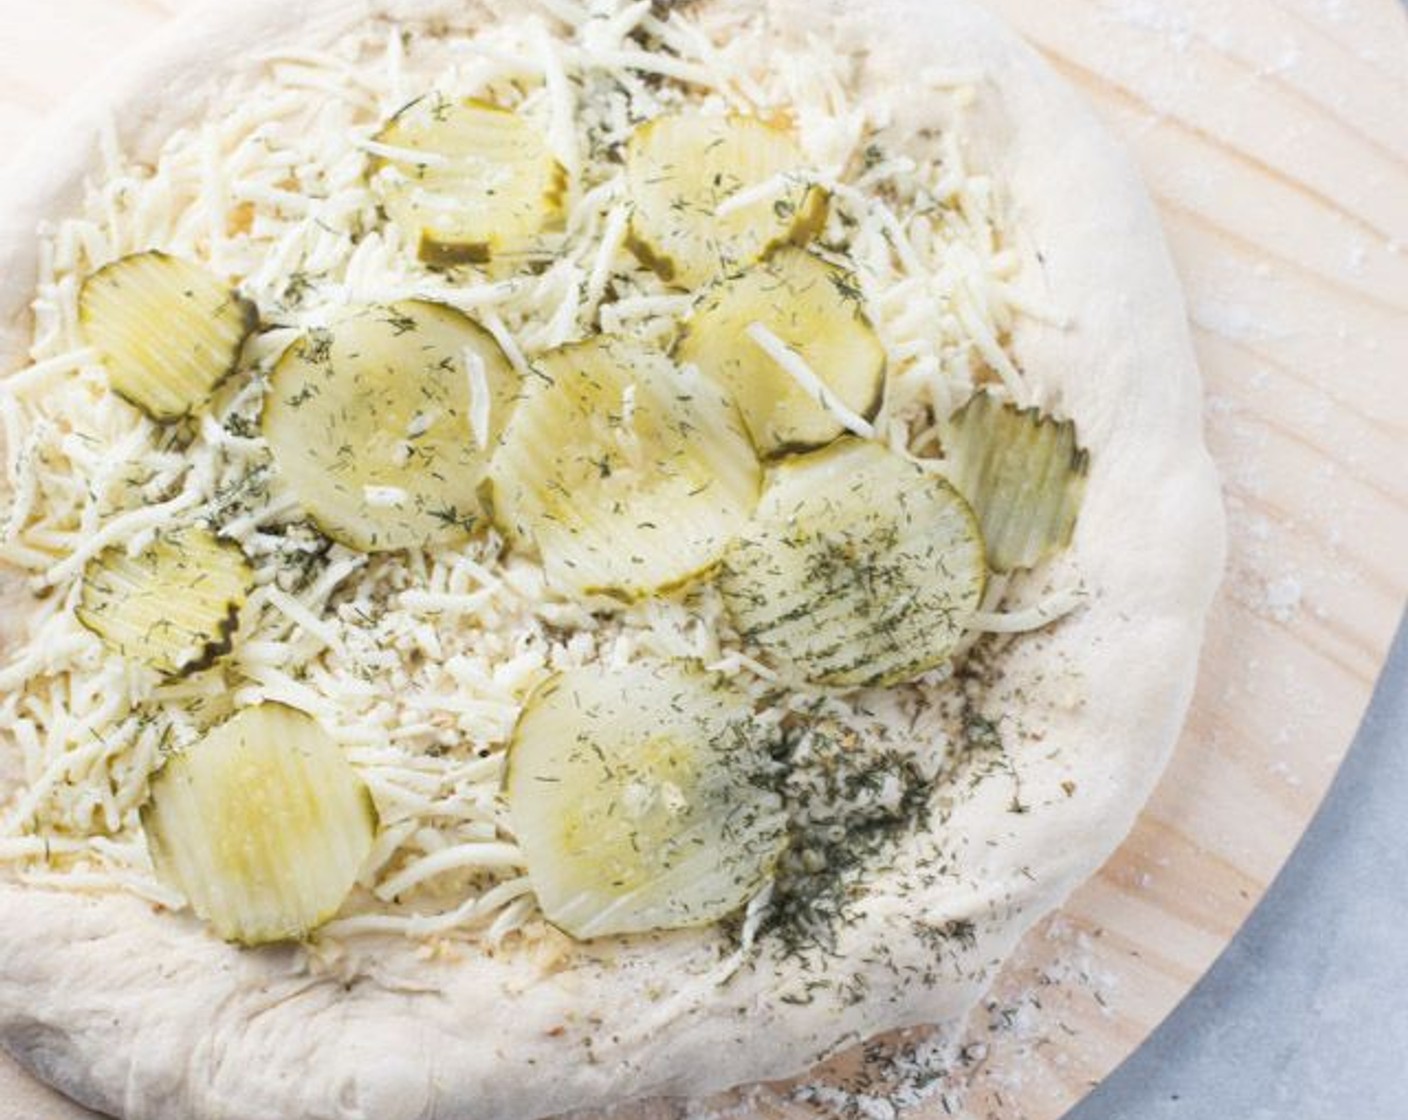 step 7 Next, top the pie with the Shredded Mozzarella Cheese (1 cup). Finally, top the pie with the Dill Pickle Coins (1/2 cup) and sprinkle on top the Dried Dill Weed (1/4 tsp).